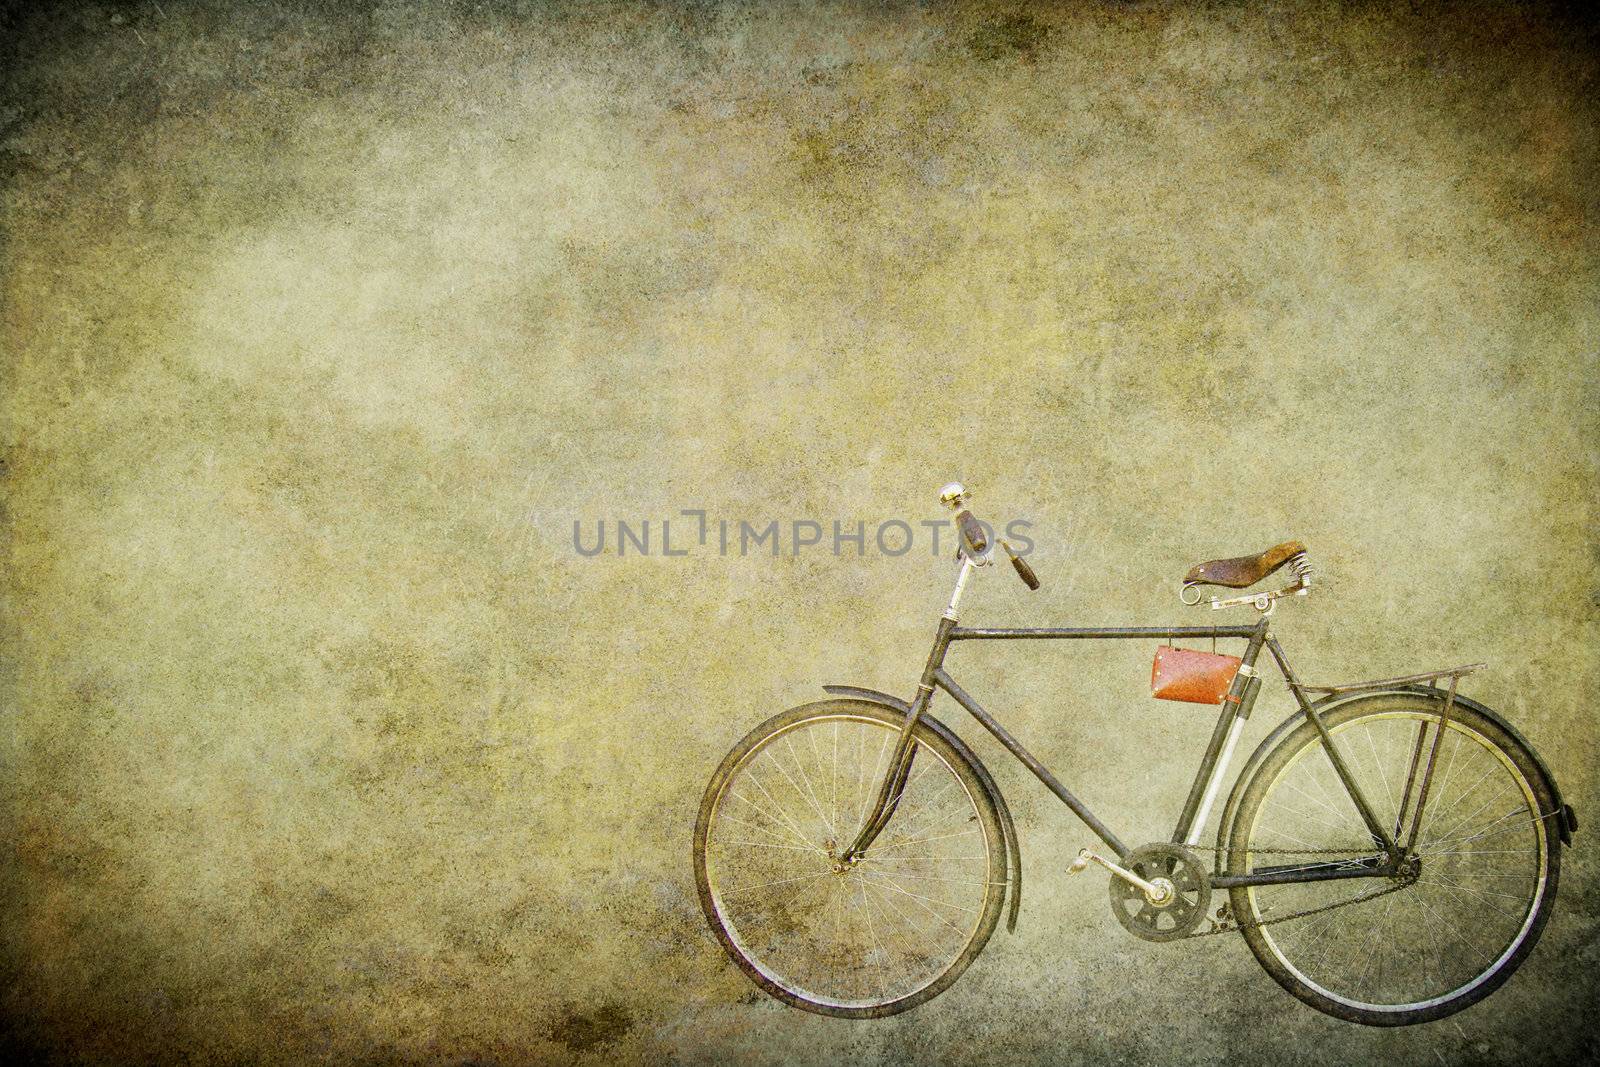 Bicycle on a grunge background by petrkurgan